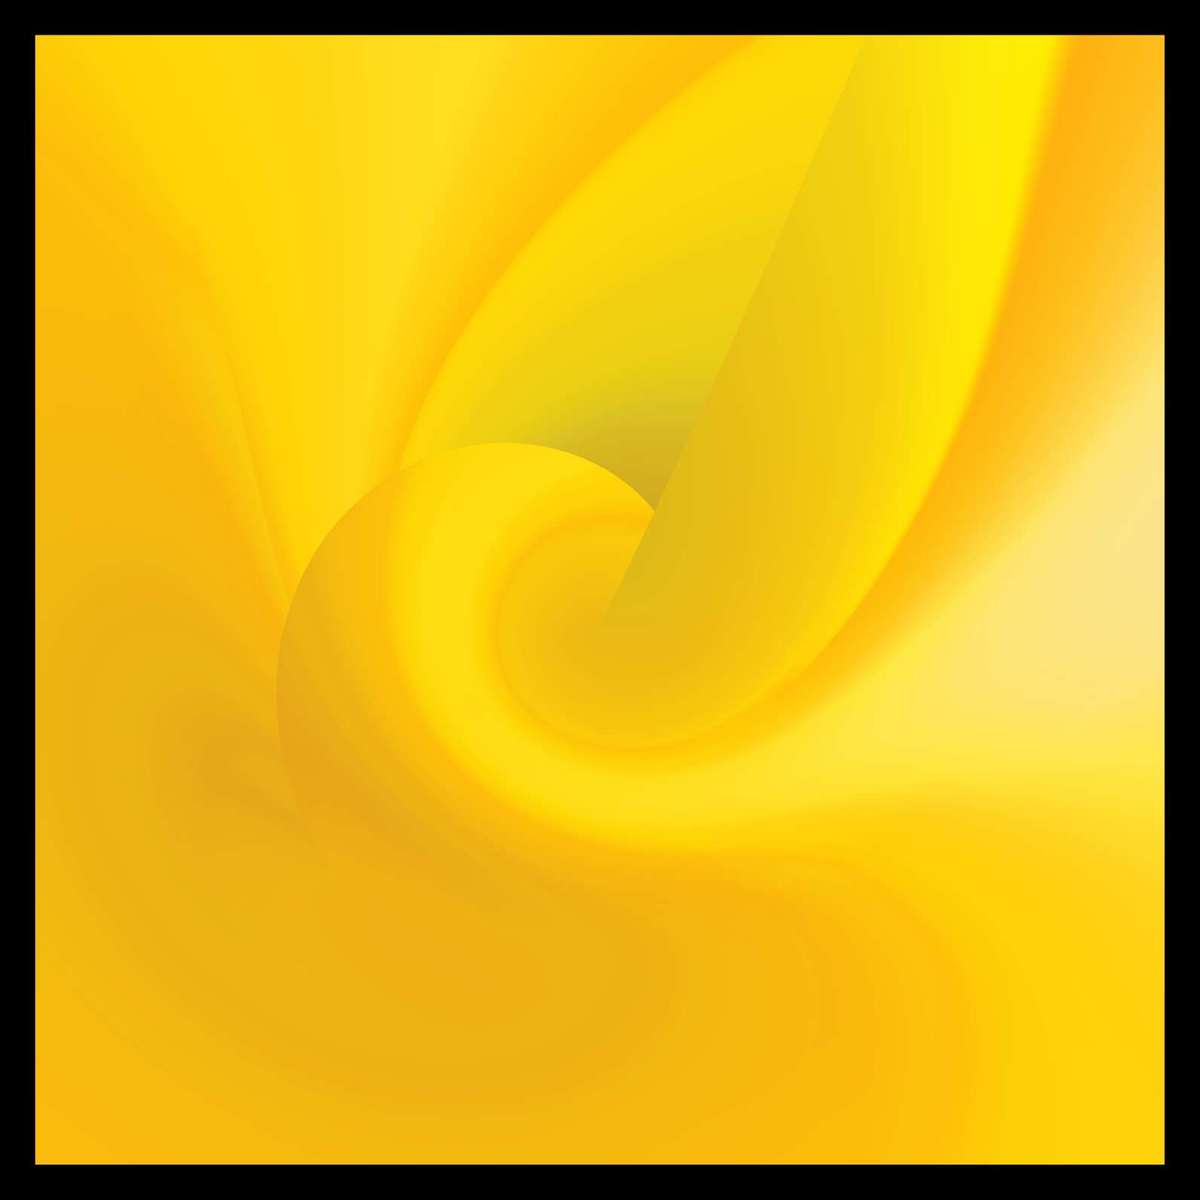 Rhapsody in Yellow : Section 0 : American artist digital invention archival artifact color print image emerging capture creative convergent transparency universe dream history painter Hybrid exhibition